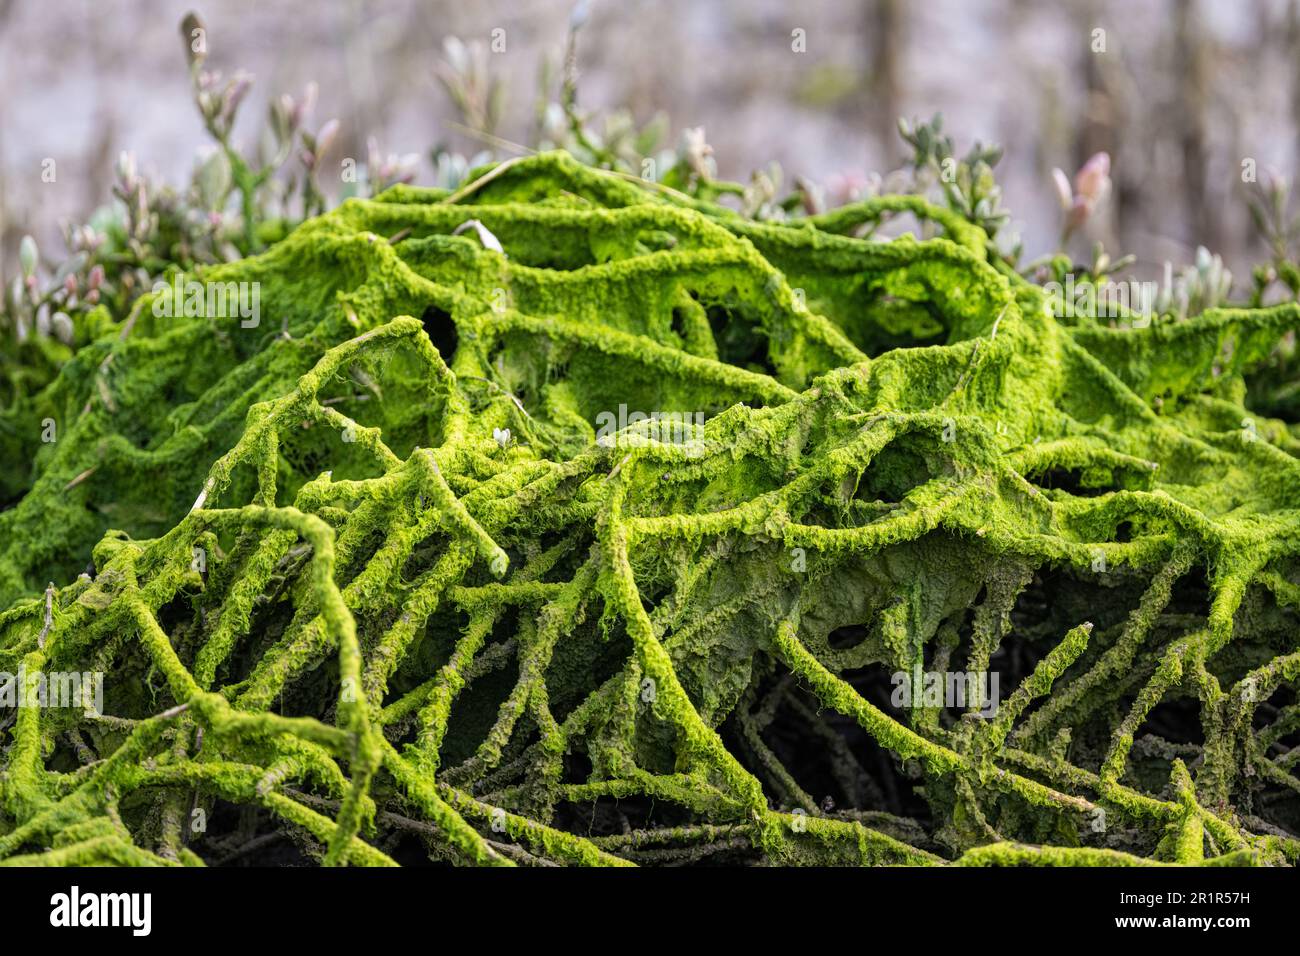 Twisted strands of green seaweed, RSPB nature reserve Pagham Harbour, Sussex, UK Stock Photo